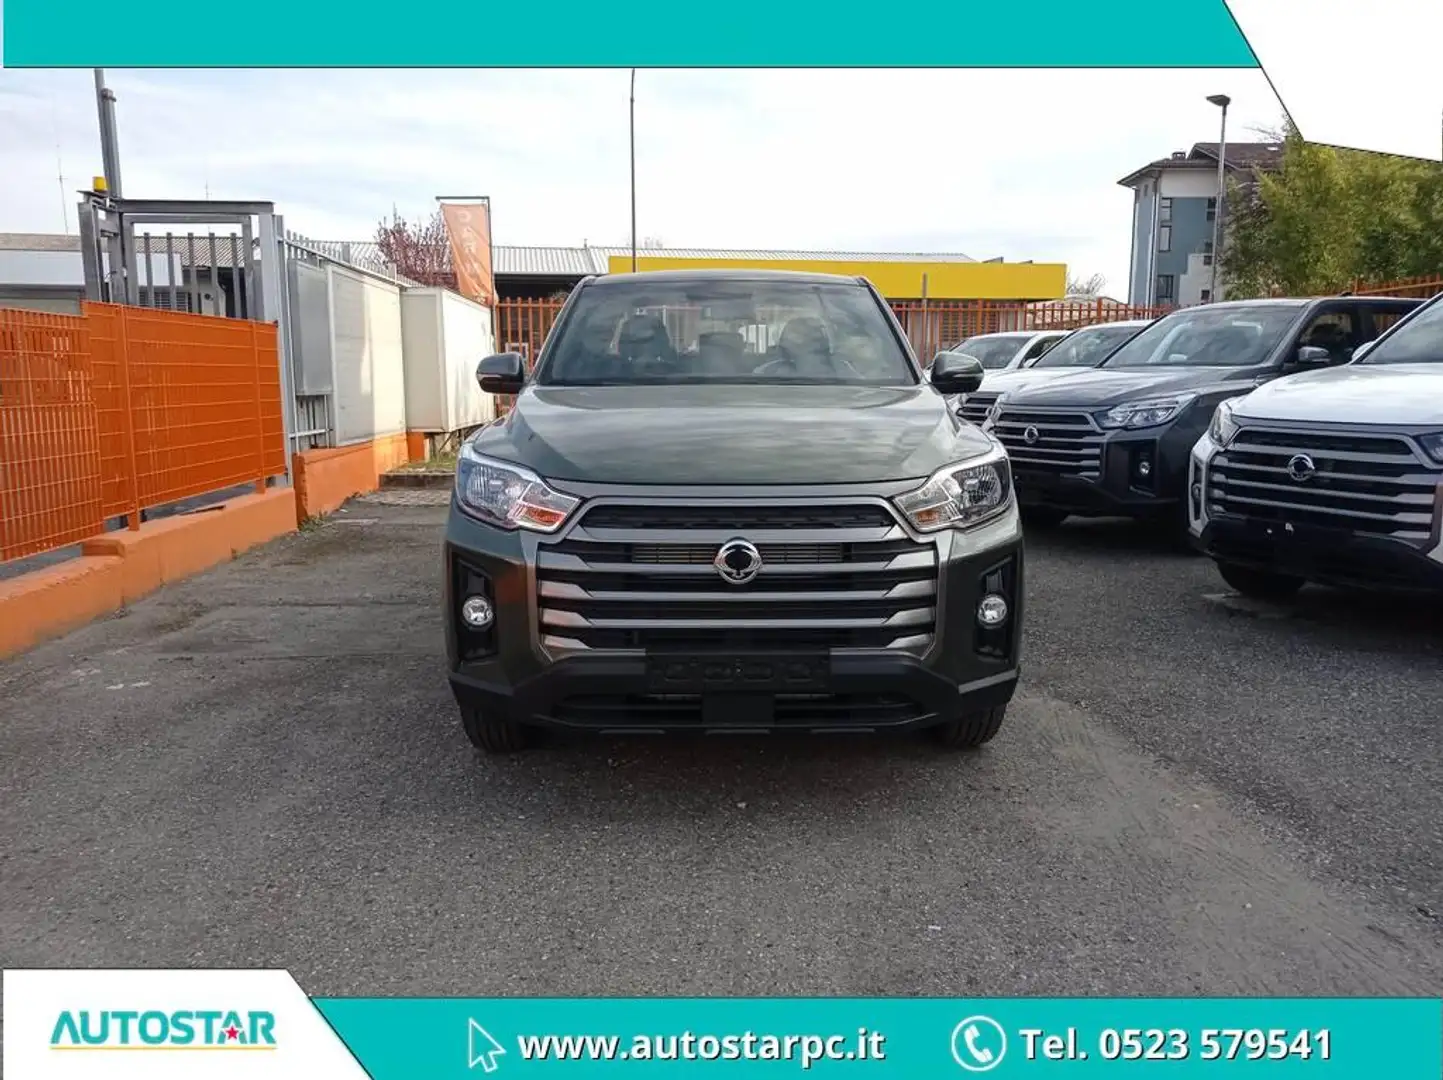 SsangYong Rexton XL 2.2 double cab Work 4wd Green - 2